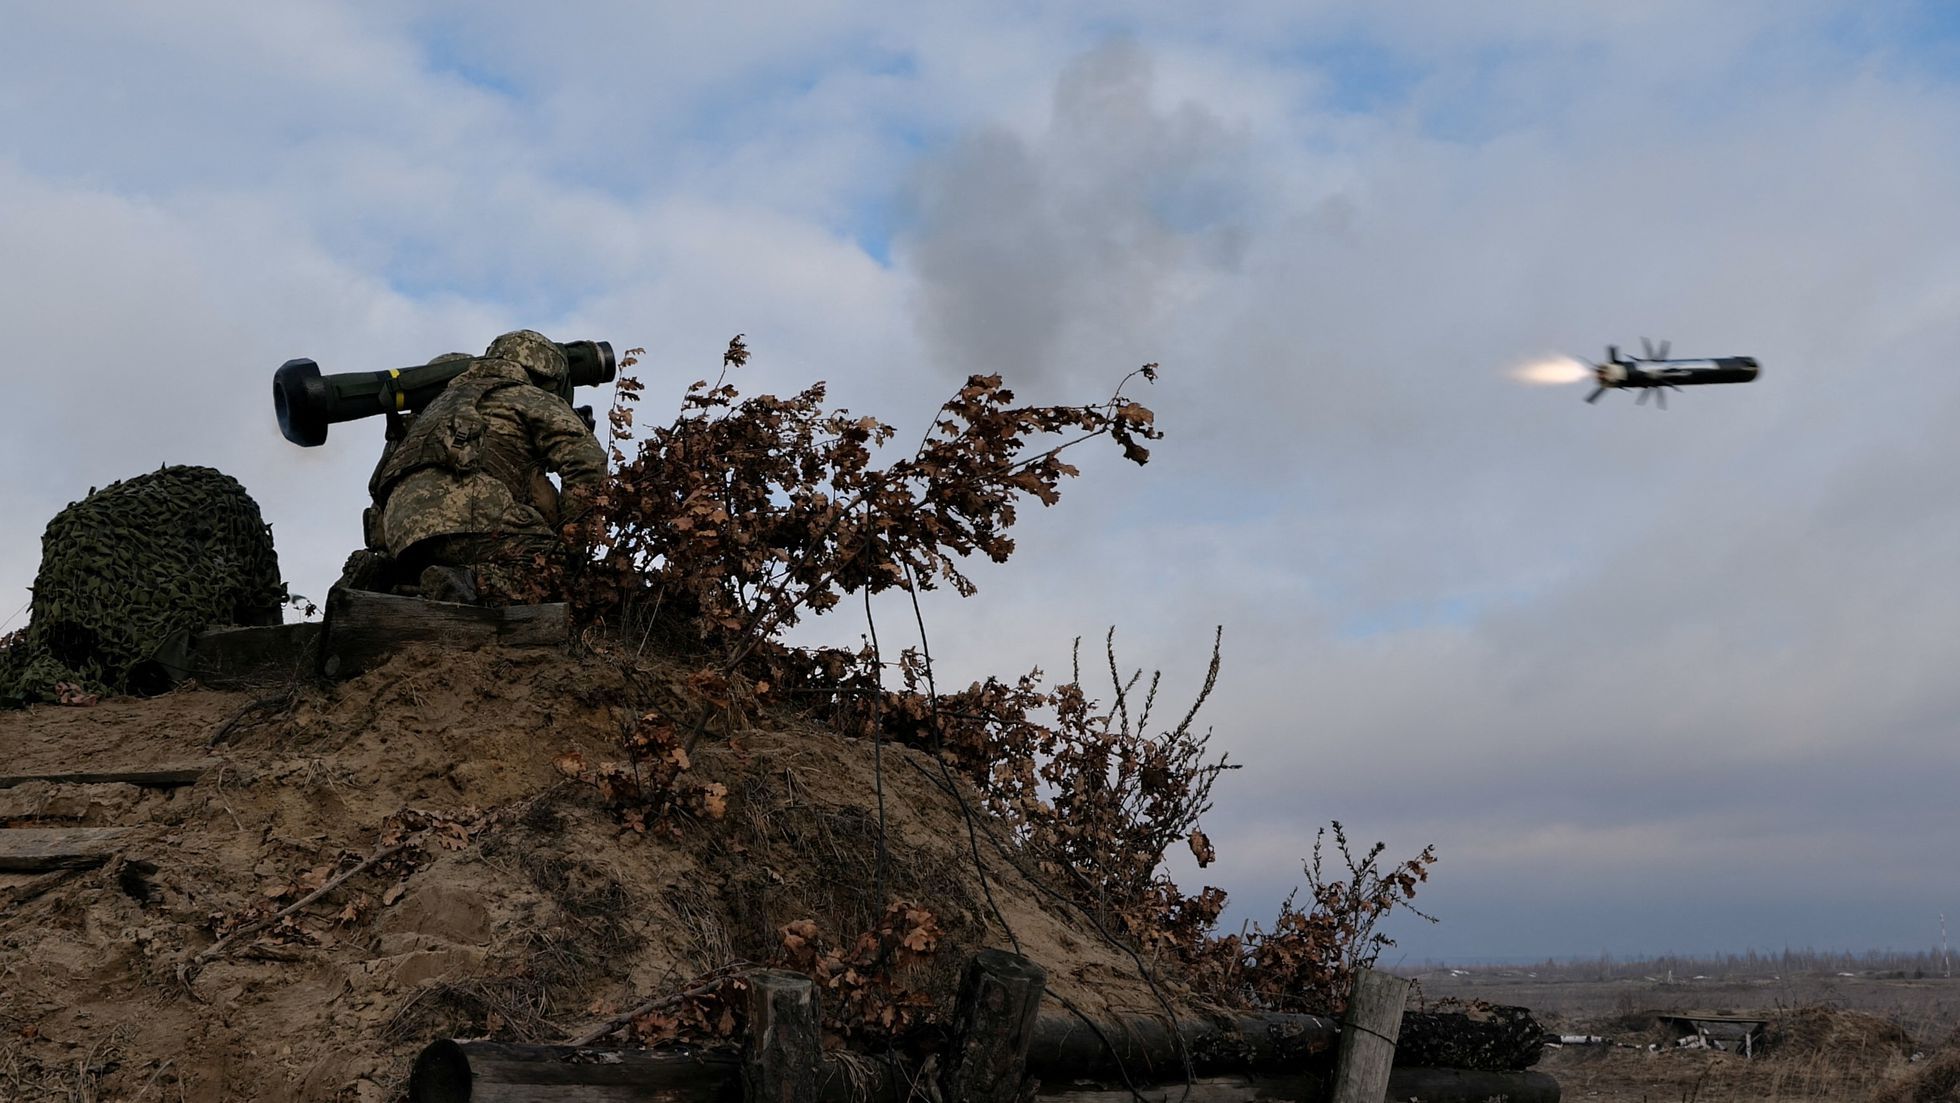 A Ukrainian soldier fires a Javelin anti-tank missile during training on February 18, days before the Russian invasion.  (UKRAINIAN JOINT FORCES OPERATION / REUTERS).